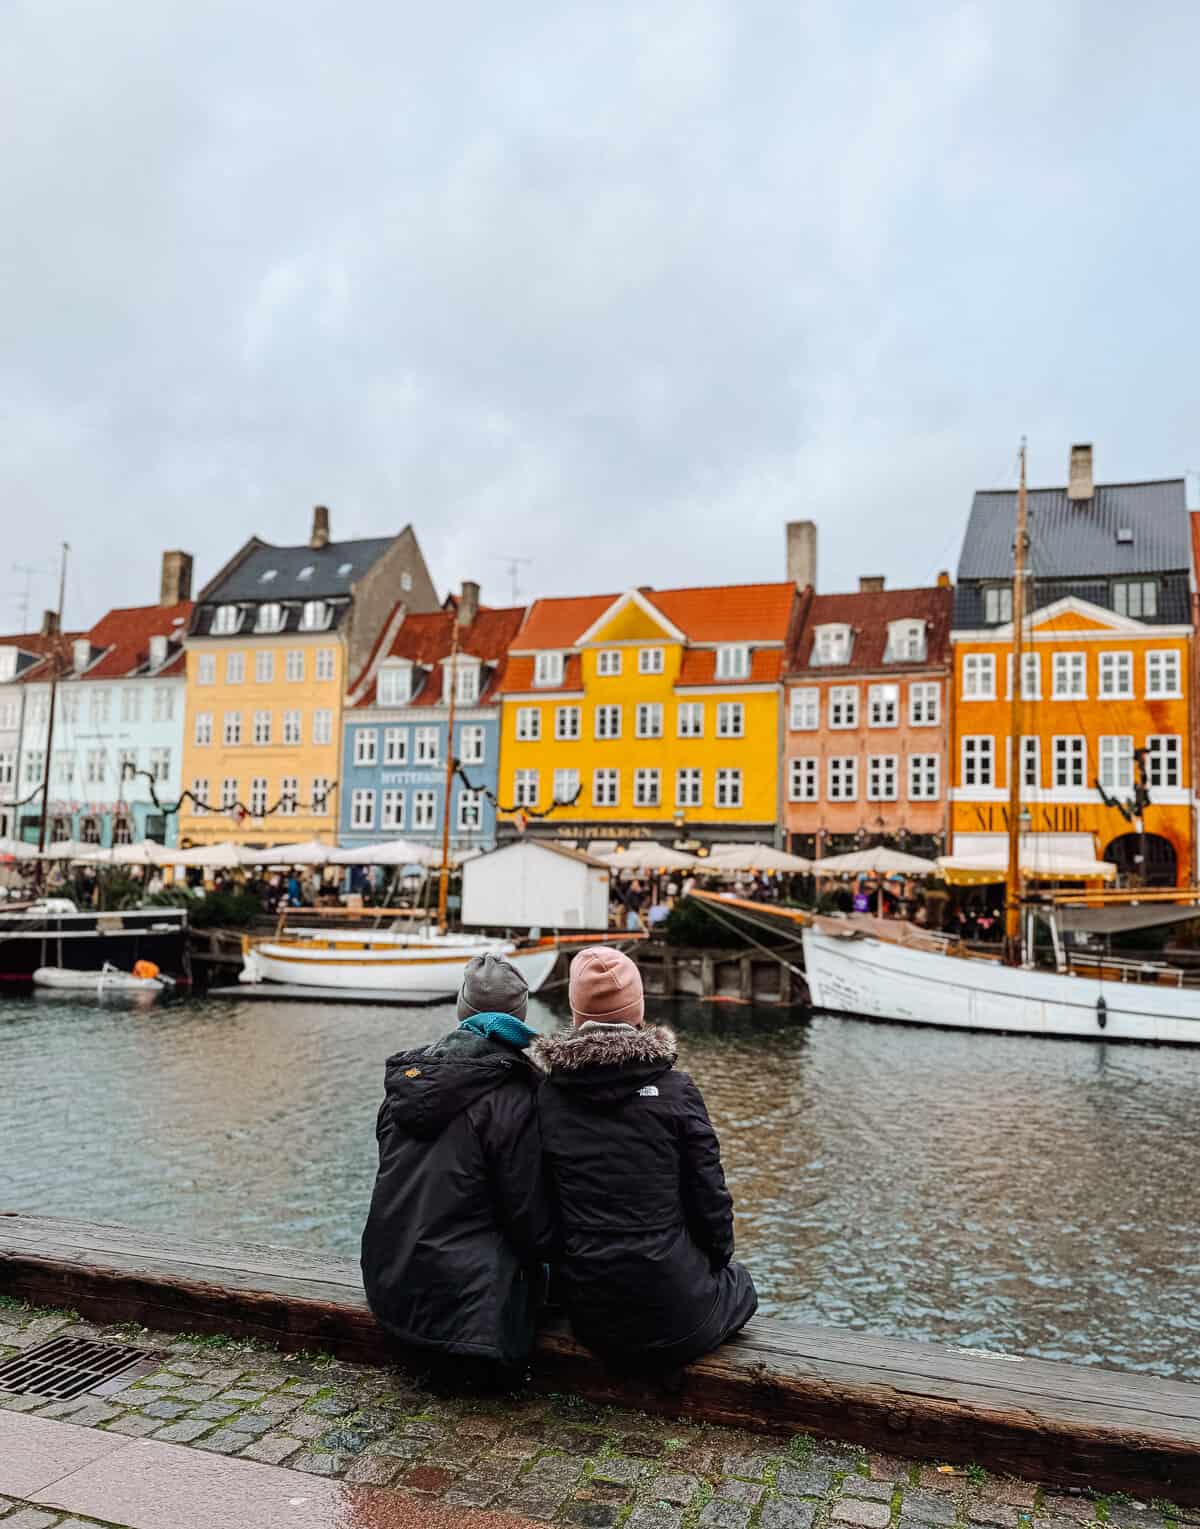 A couple sits by the canal in Copenhagen, facing the row of brightly colored buildings, enjoying the view despite the overcast sky.